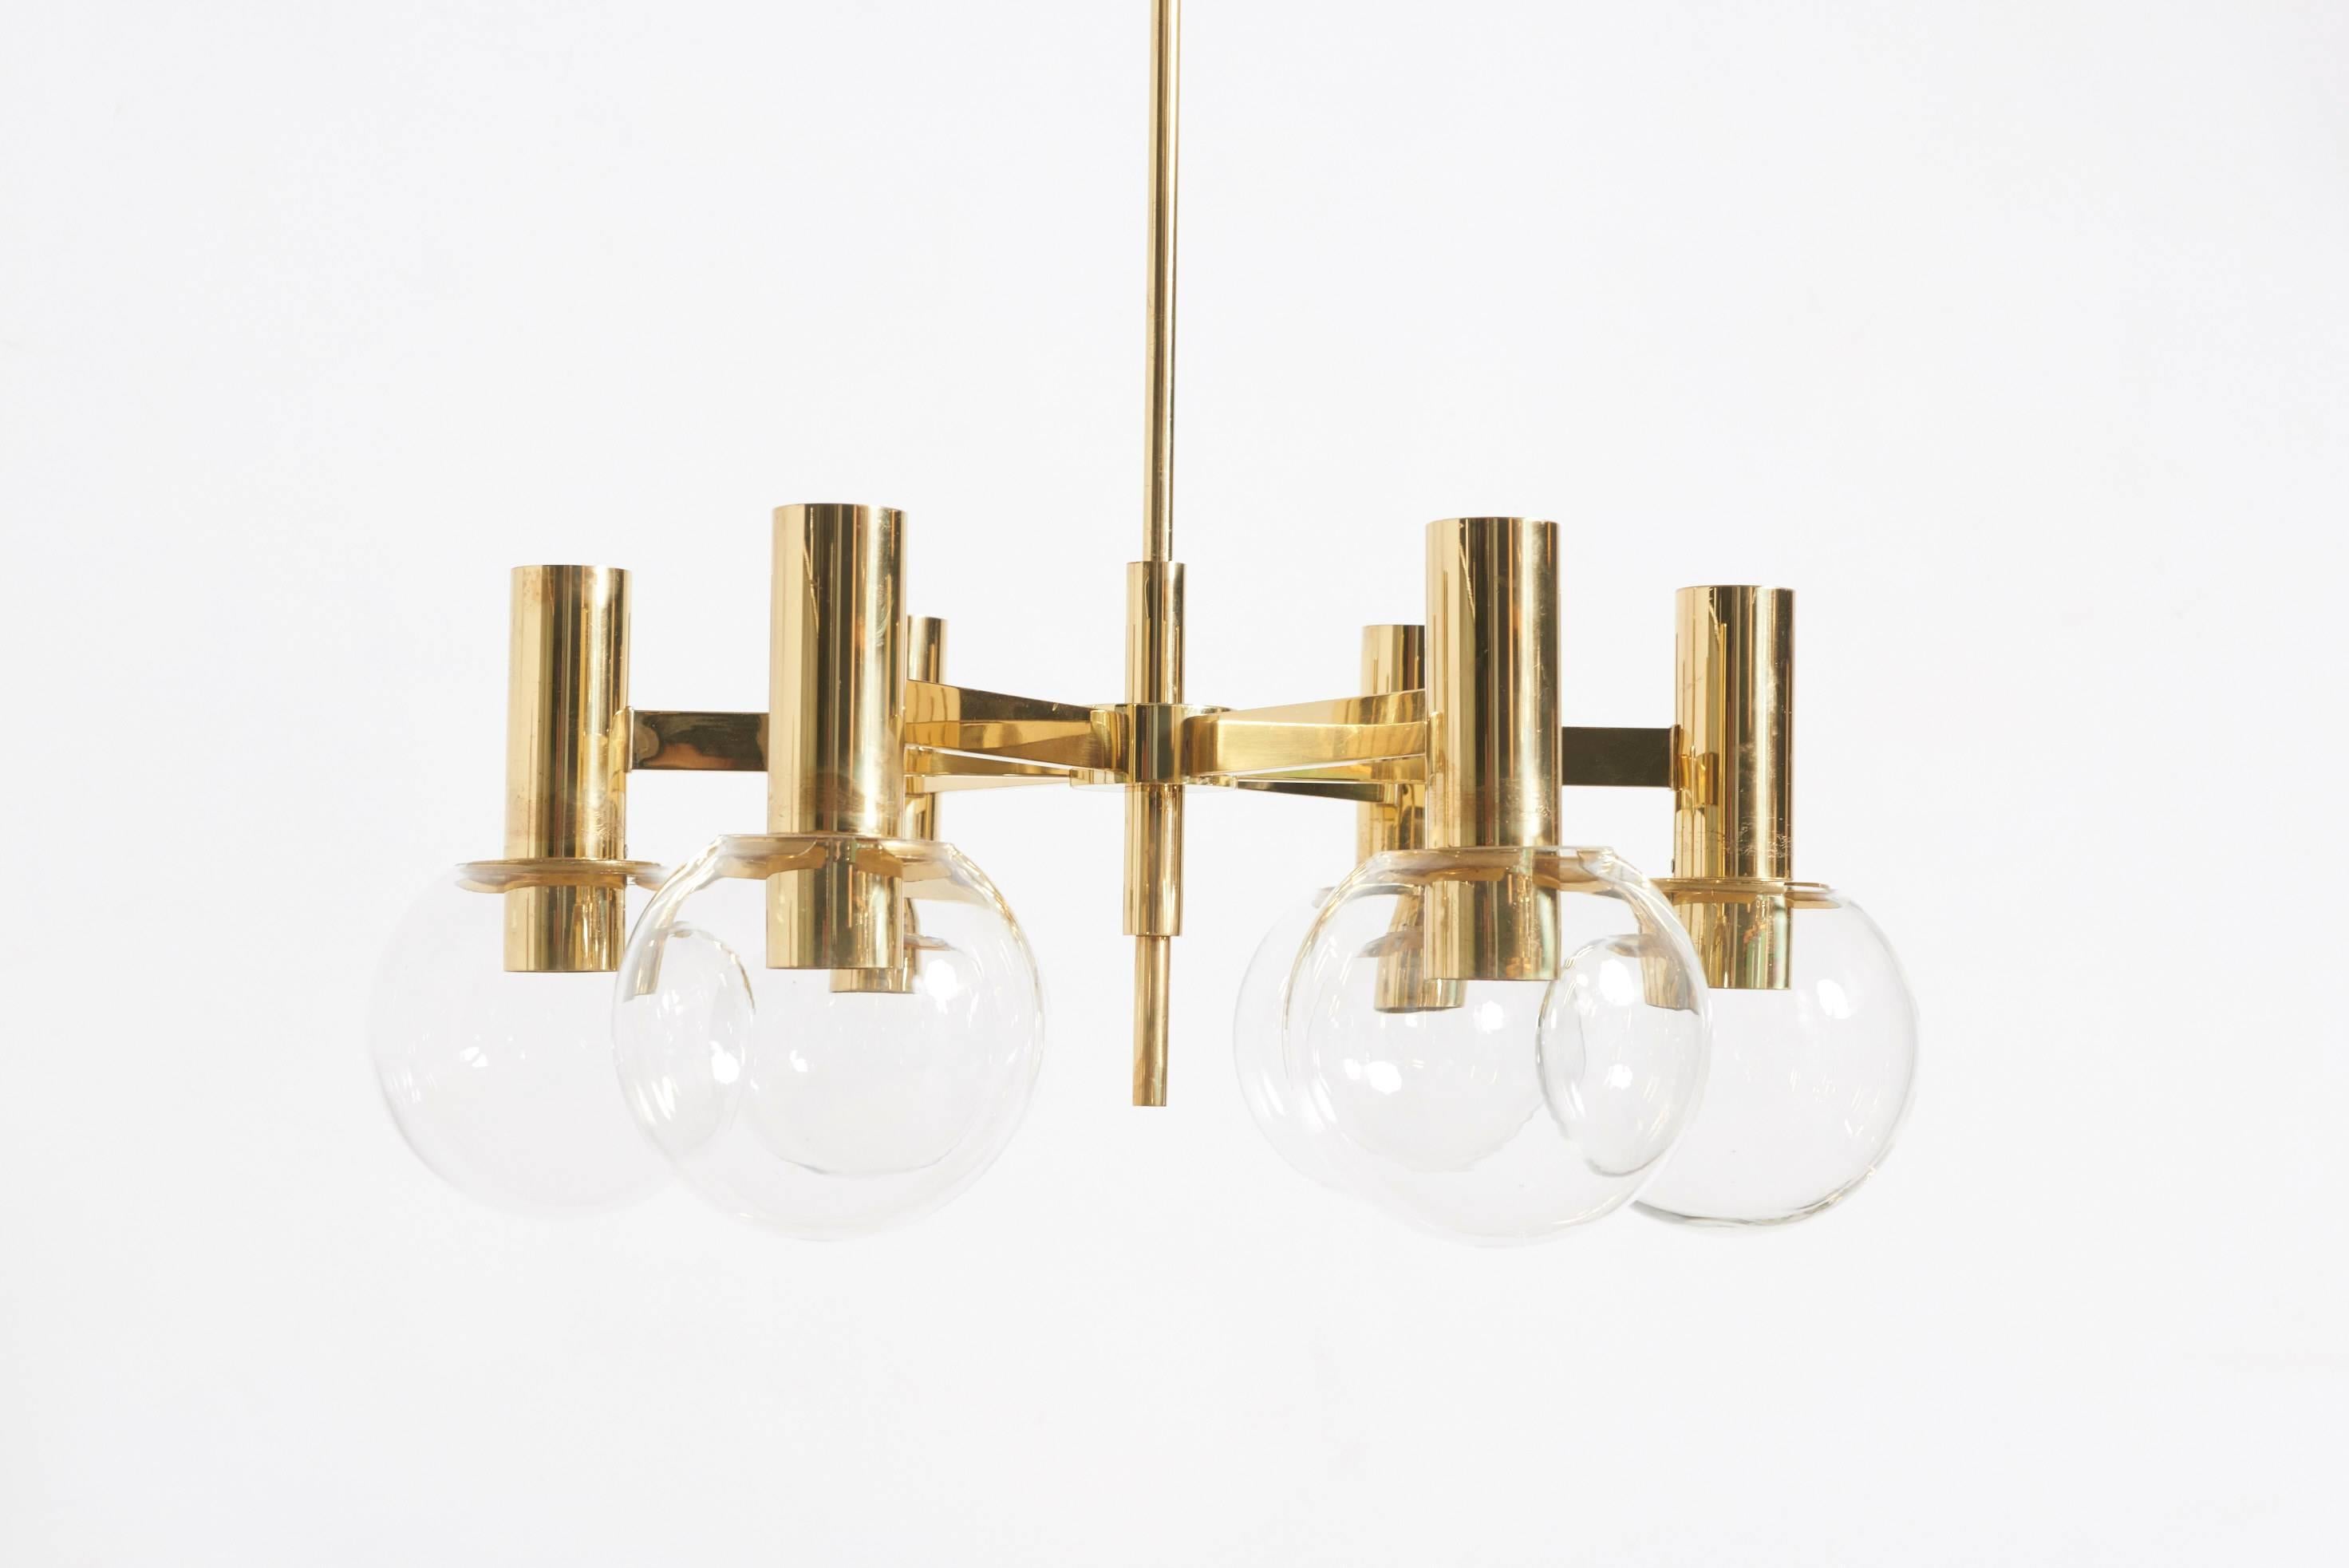 A large and impressive six-armed chandelier in brass with clear glass shades designed by Hans-Agne Jakobsson for Hans-Agne Jakobsson AB,Markaryd, Sweden.


Hans-Agne Jakobsson was one of the world’s most versatile and productive lighting